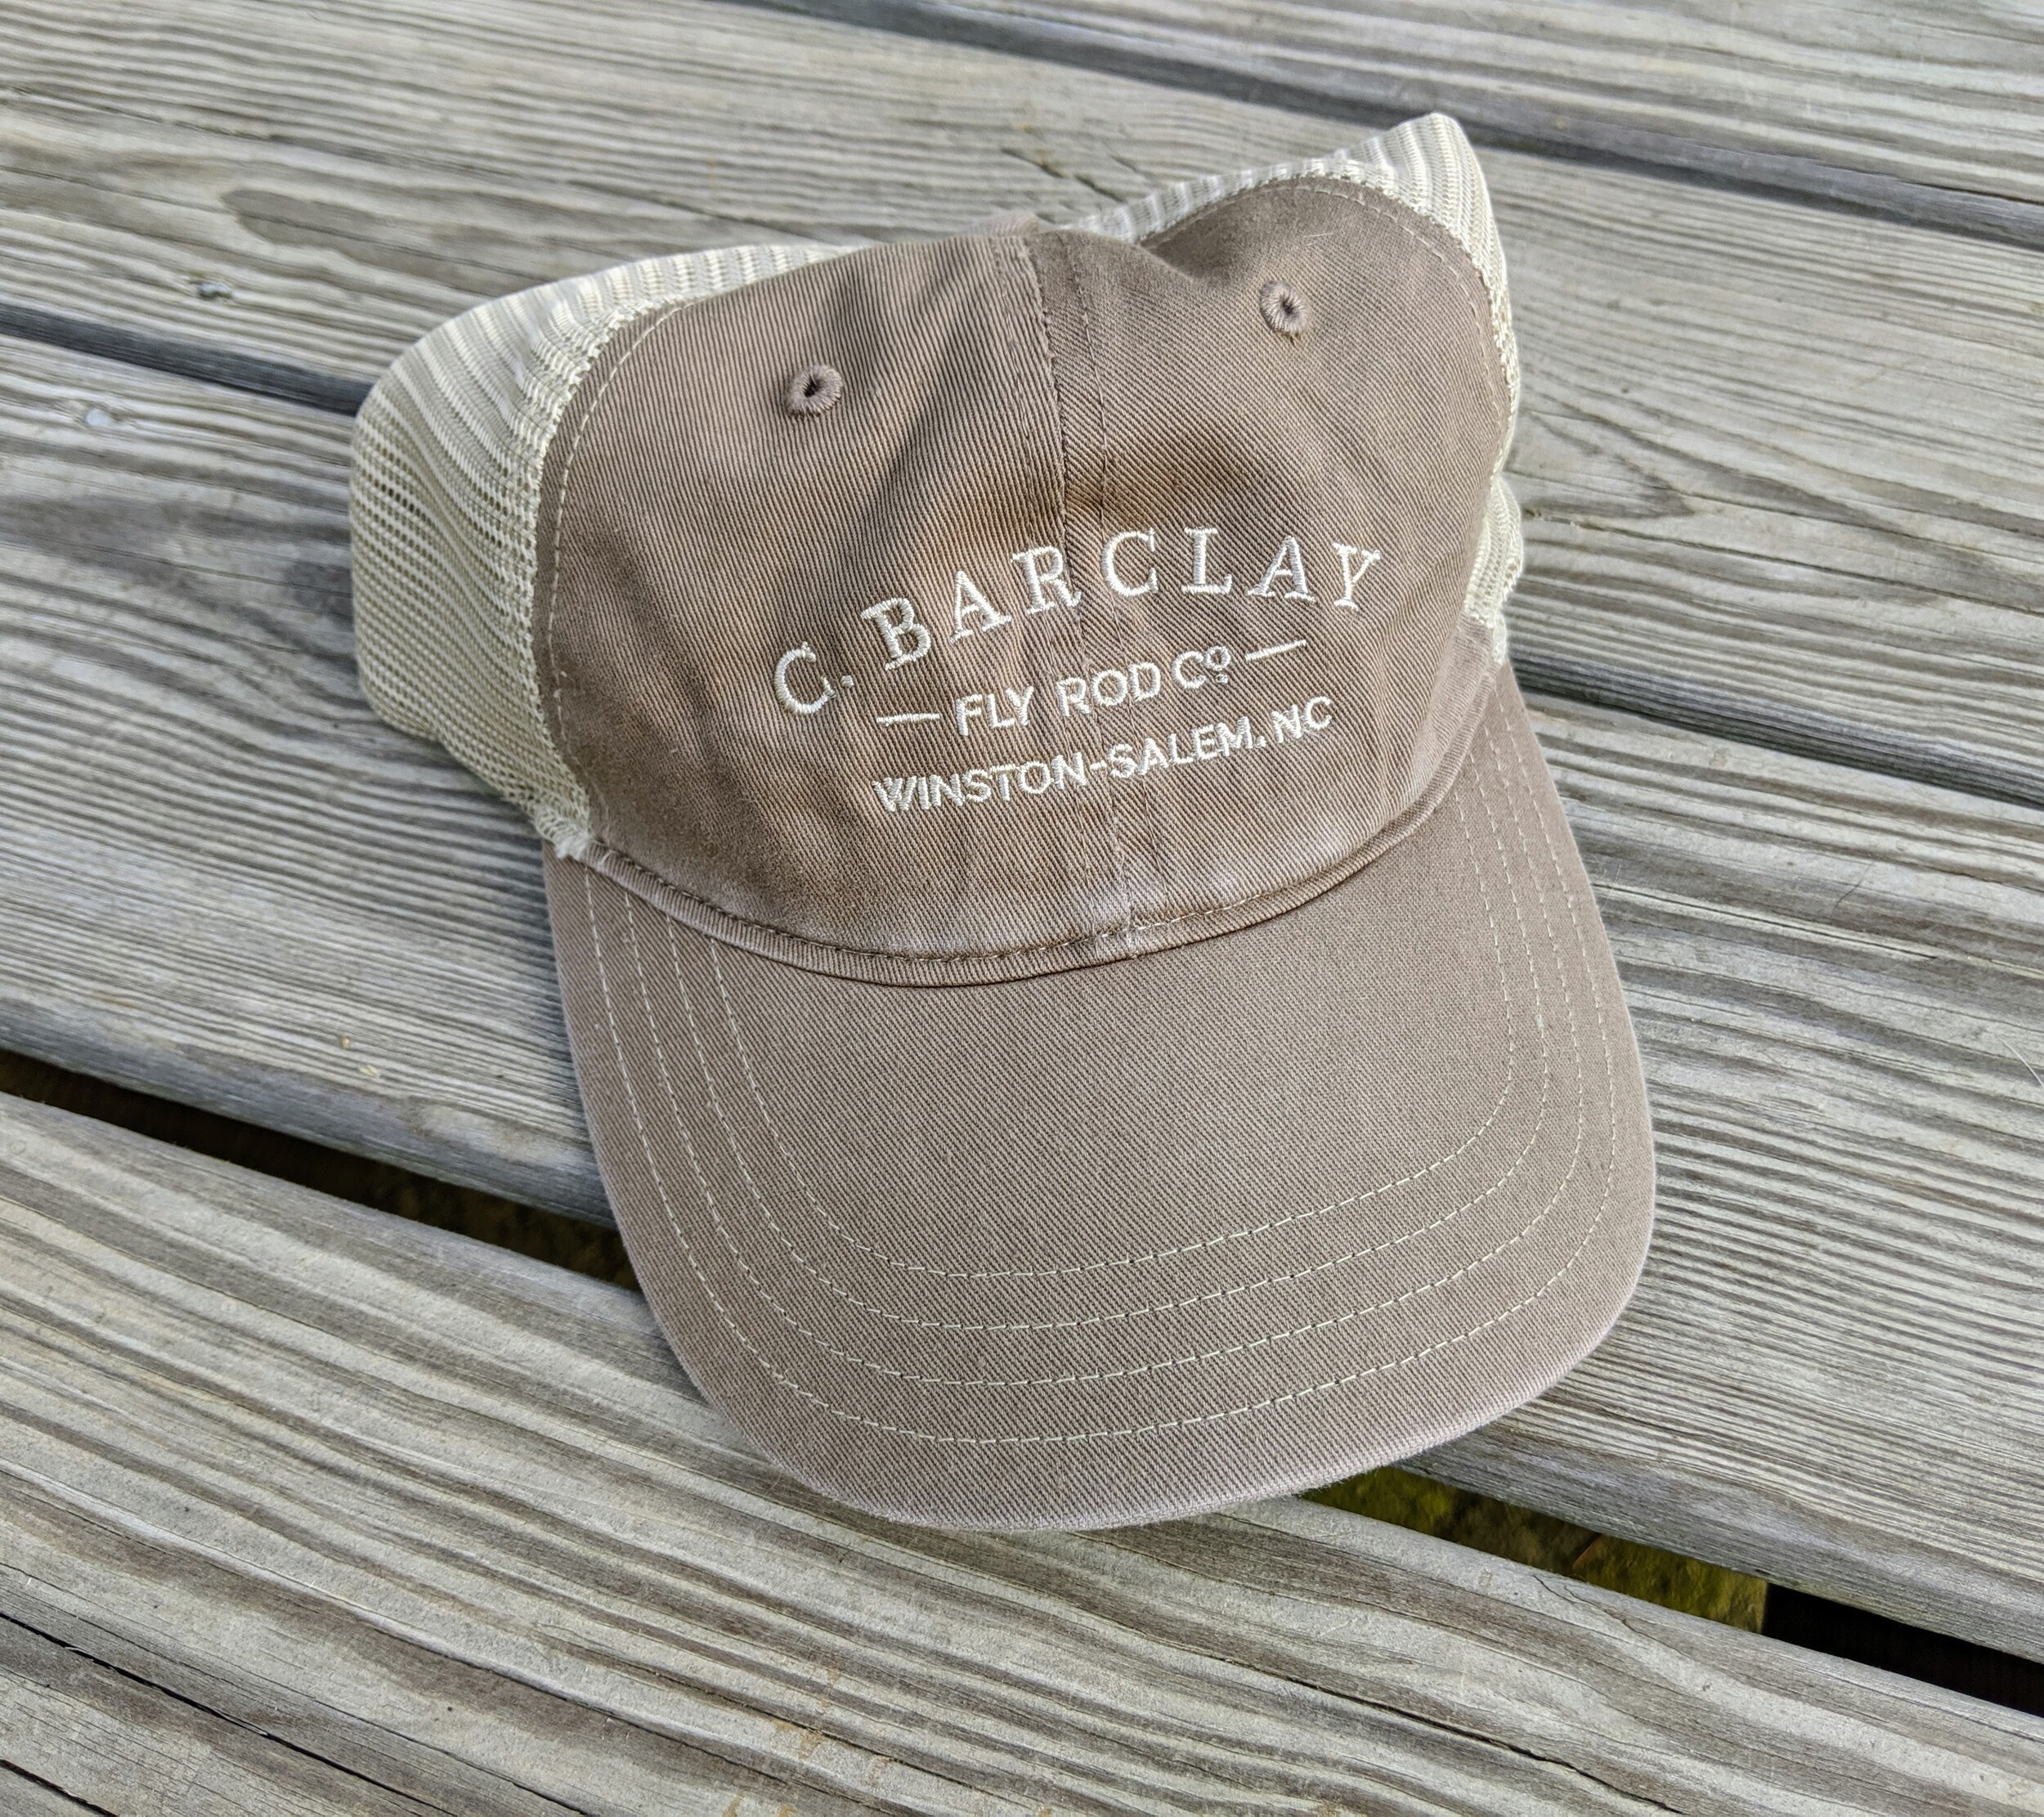 T-Shirts and stickers — C. Barclay Fly Rod Co.